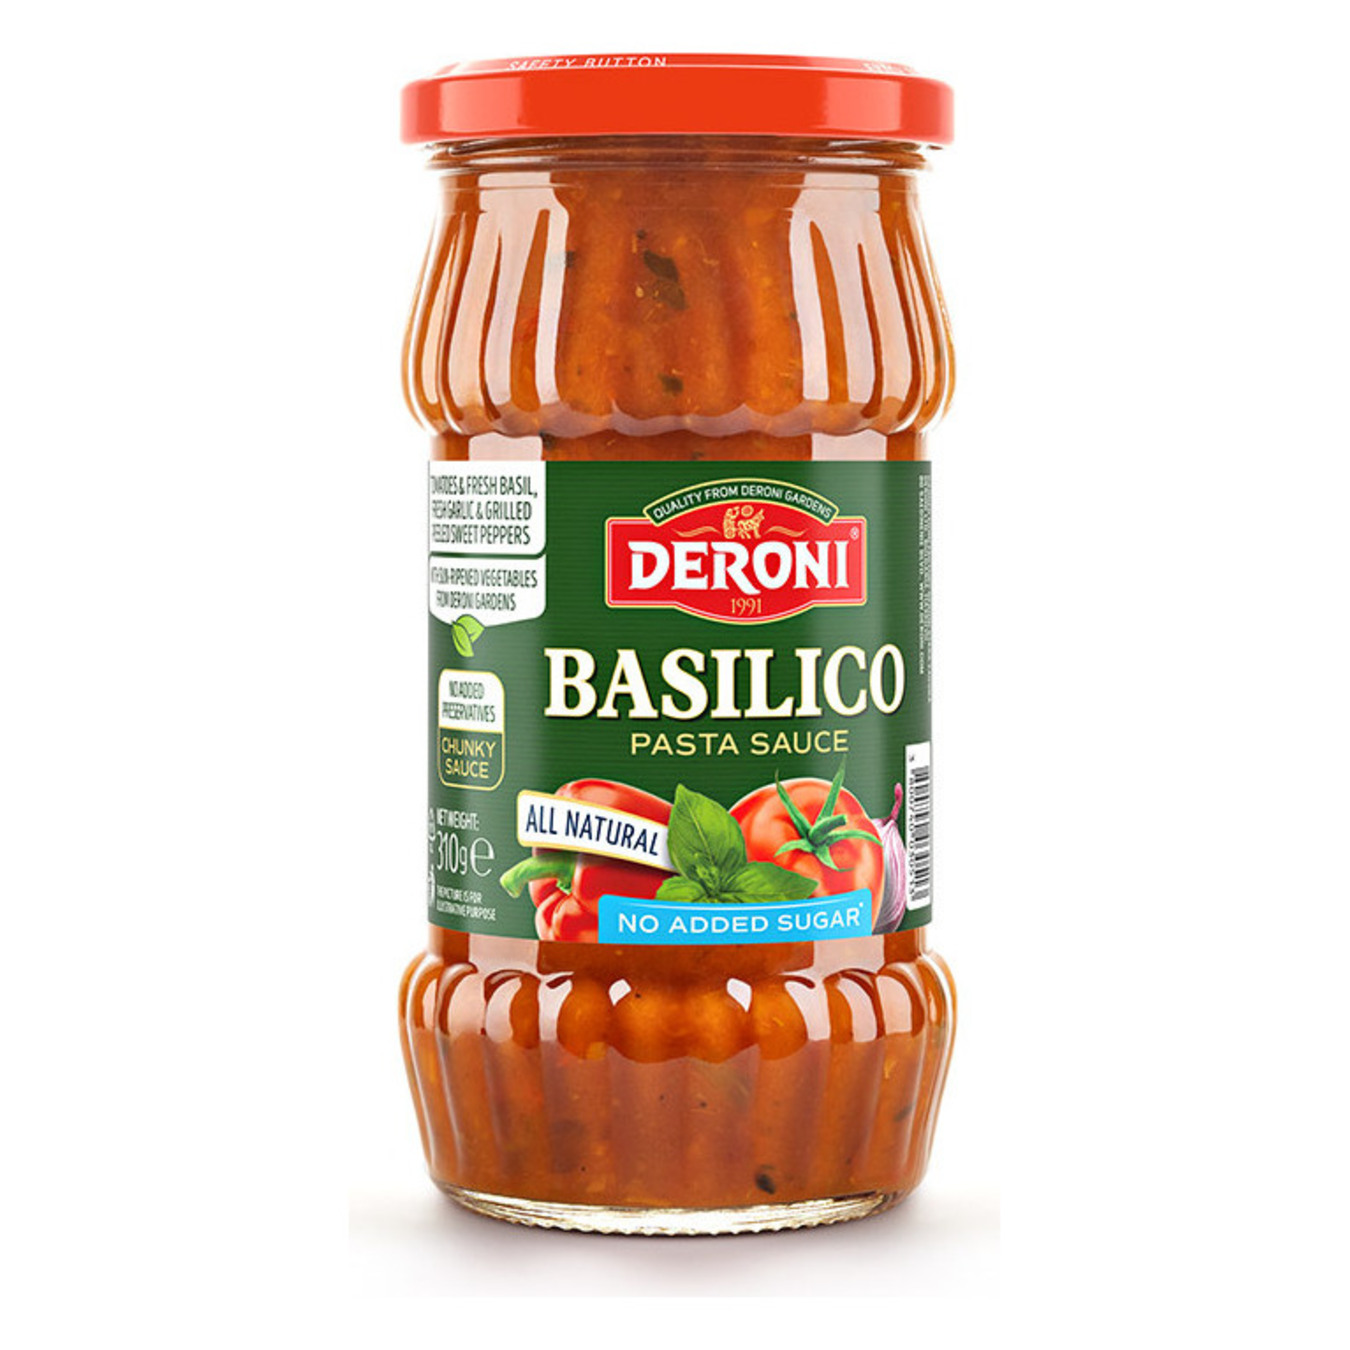 Deroni sauce for pasta with basil 310g